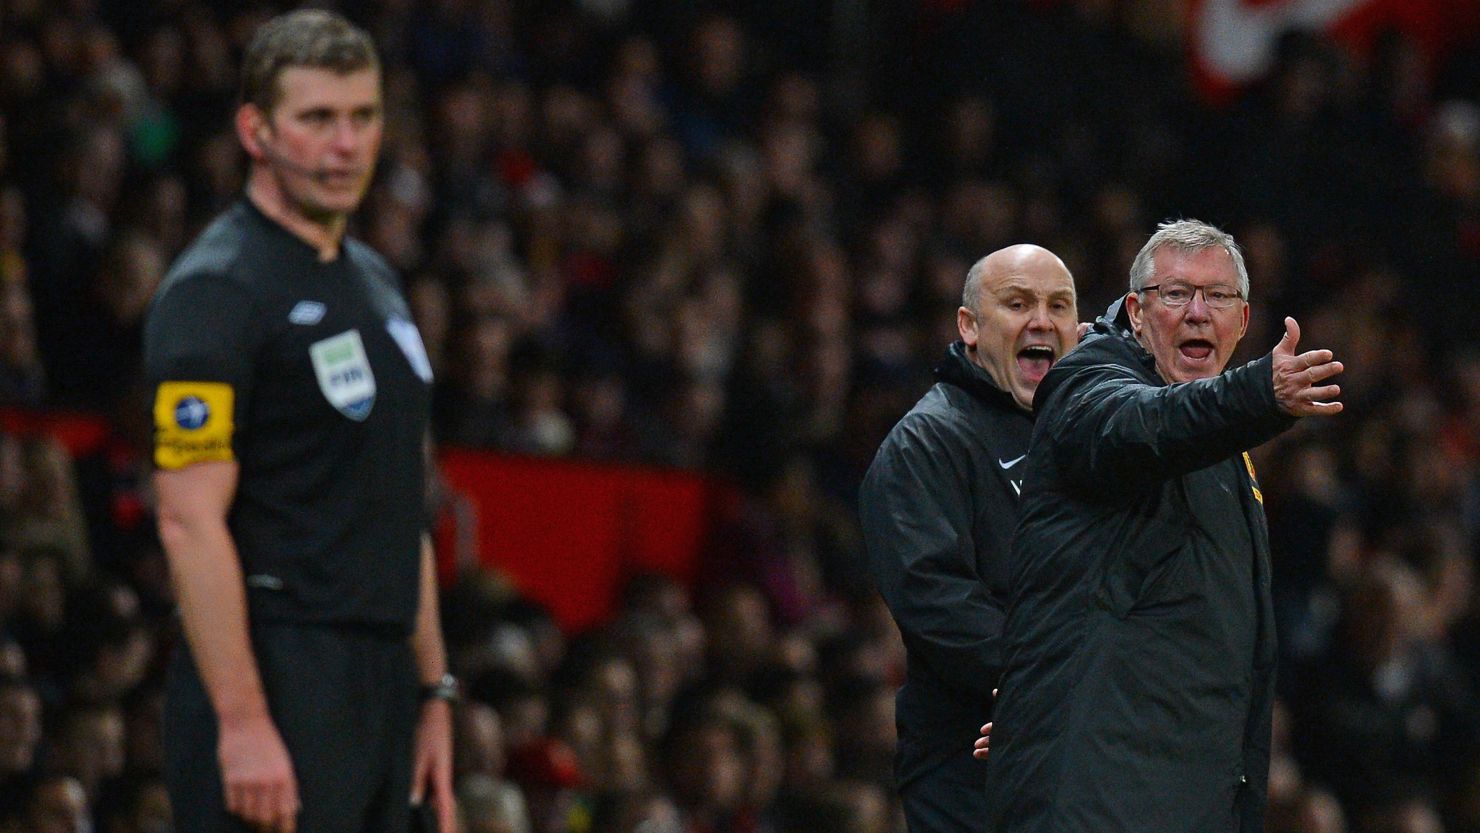 Manchester United manager Alex Ferguson vents his fury during his team's 4-3 win over Newcastle at Old Trafford.